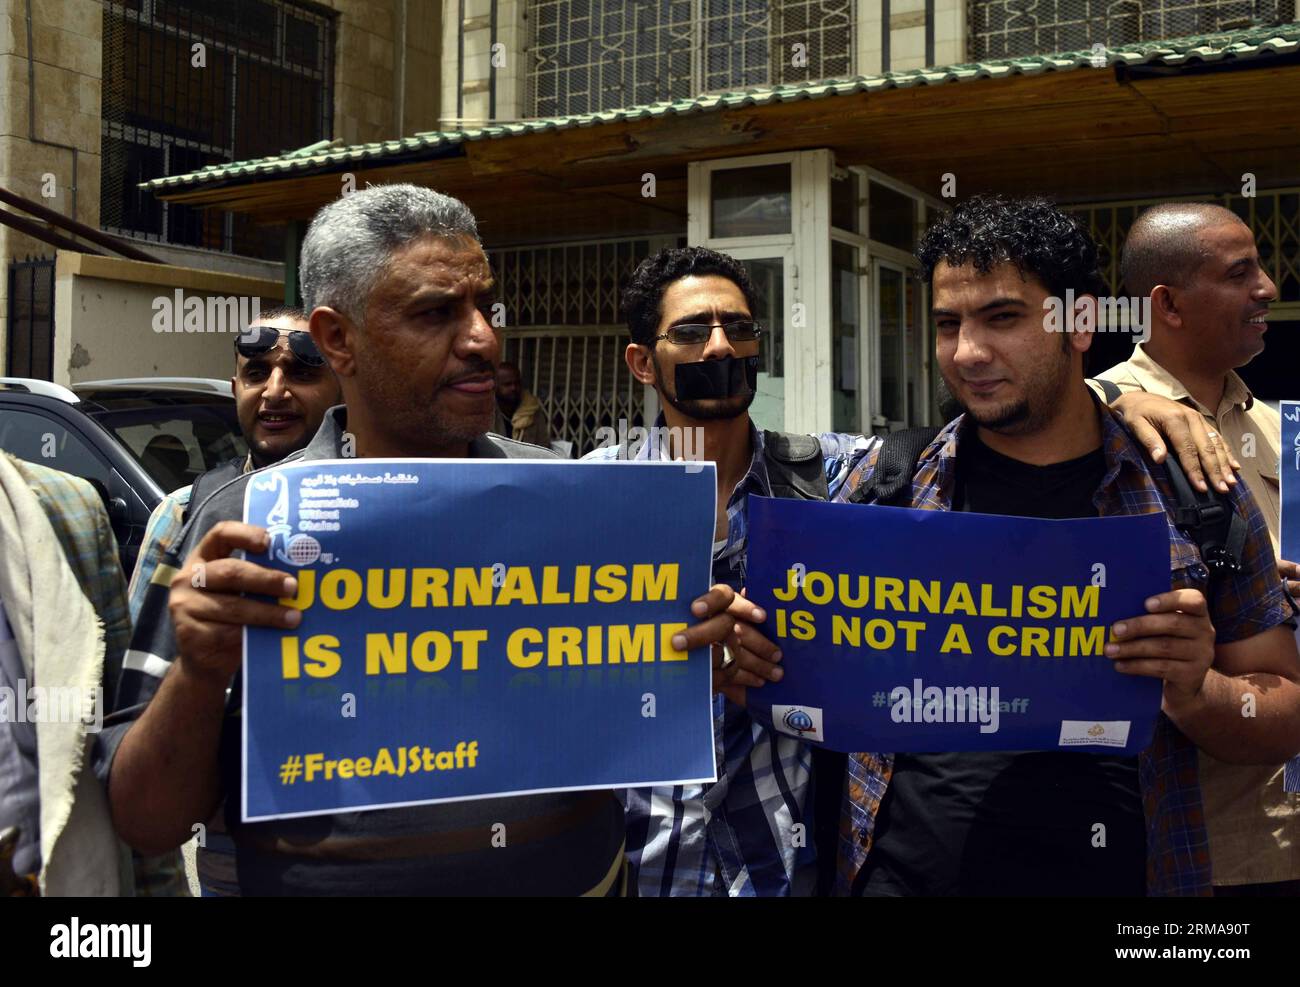 (140625) -- SANAA, June 25, 2014 (Xinhua) -- Yemeni journalists hold posters and pictures of three journalists who have been sentenced to prison by an Egyptian court during a protest in Sanaa, Yemen, June 25, 2014. An Egyptian court sentenced three Aljazeera journalists in jail over charges of aiding the outlawed Muslim Brotherhood Monday. (Xinhua/Mohammed Mohammed) YEMEN-SANAA-PROTEST-JOURNALIST PUBLICATIONxNOTxINxCHN   Sanaa June 25 2014 XINHUA Yemeni Journalists Hold Posters and Pictures of Three Journalists Who have been Sentenced to Prison by to Egyptian Court during a Protest in Sanaa Ye Stock Photo